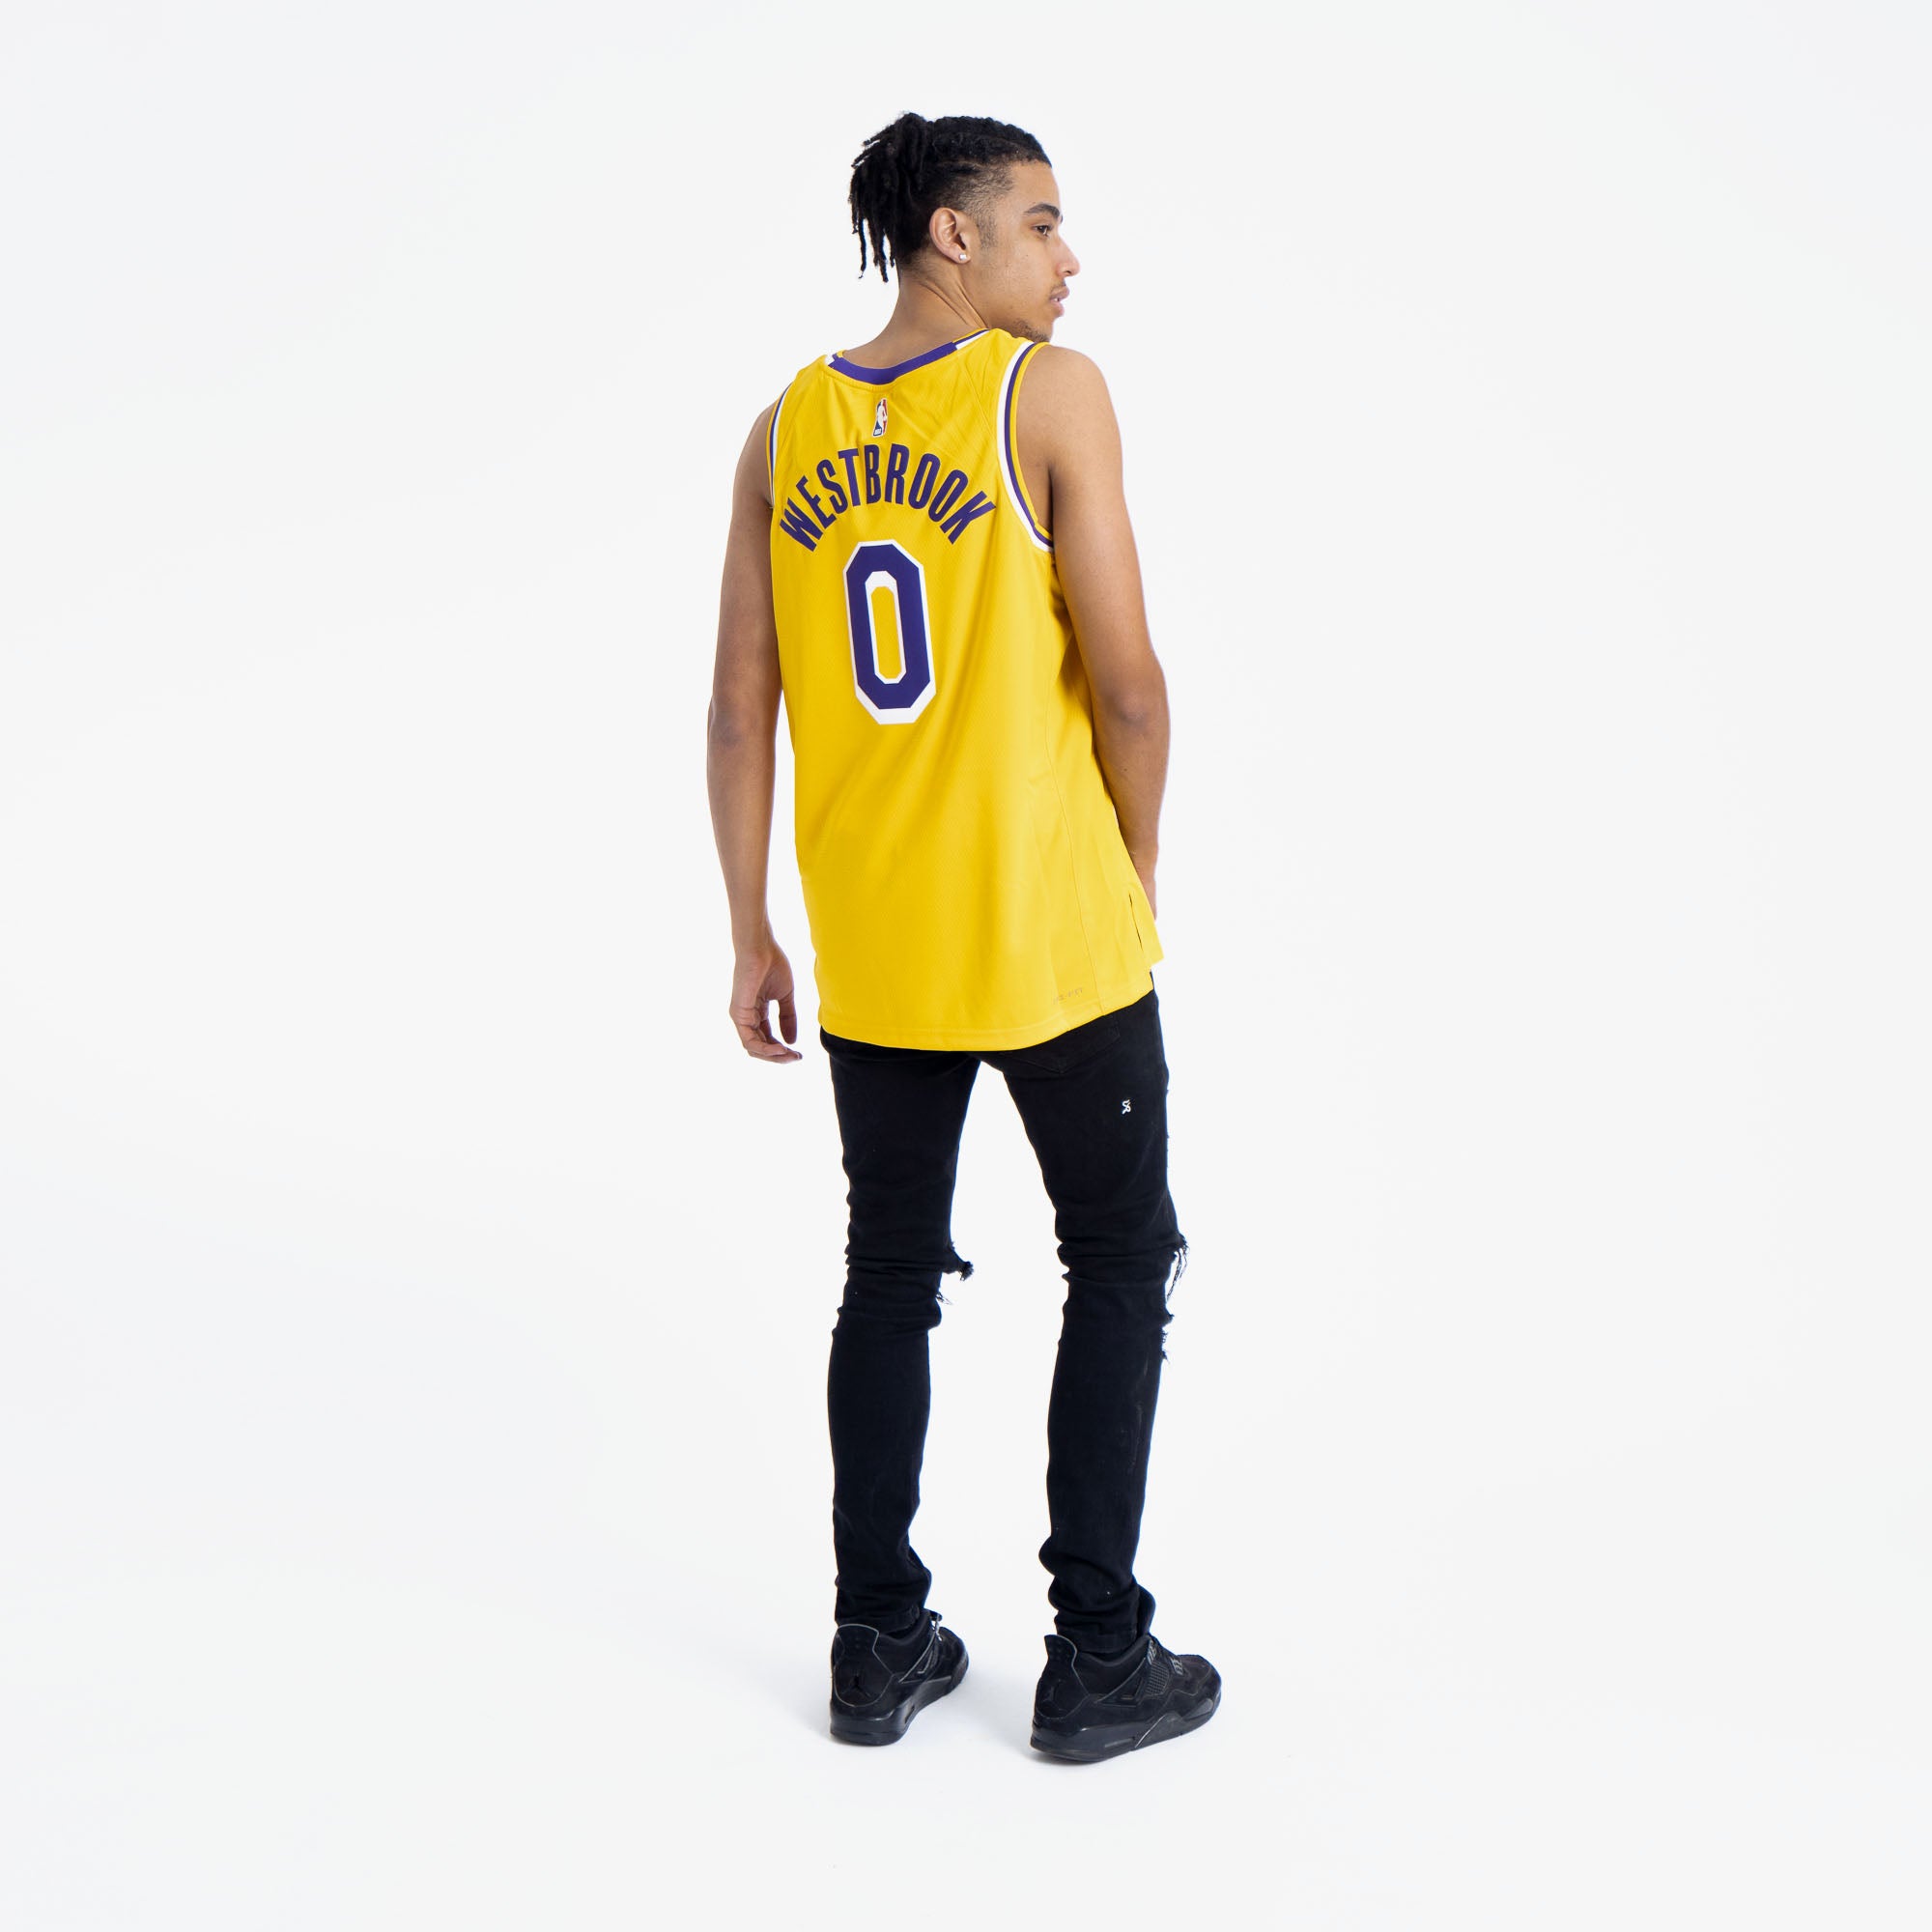 Russell Westbrook Throwback Blue Lakers Jersey – South Bay Jerseys